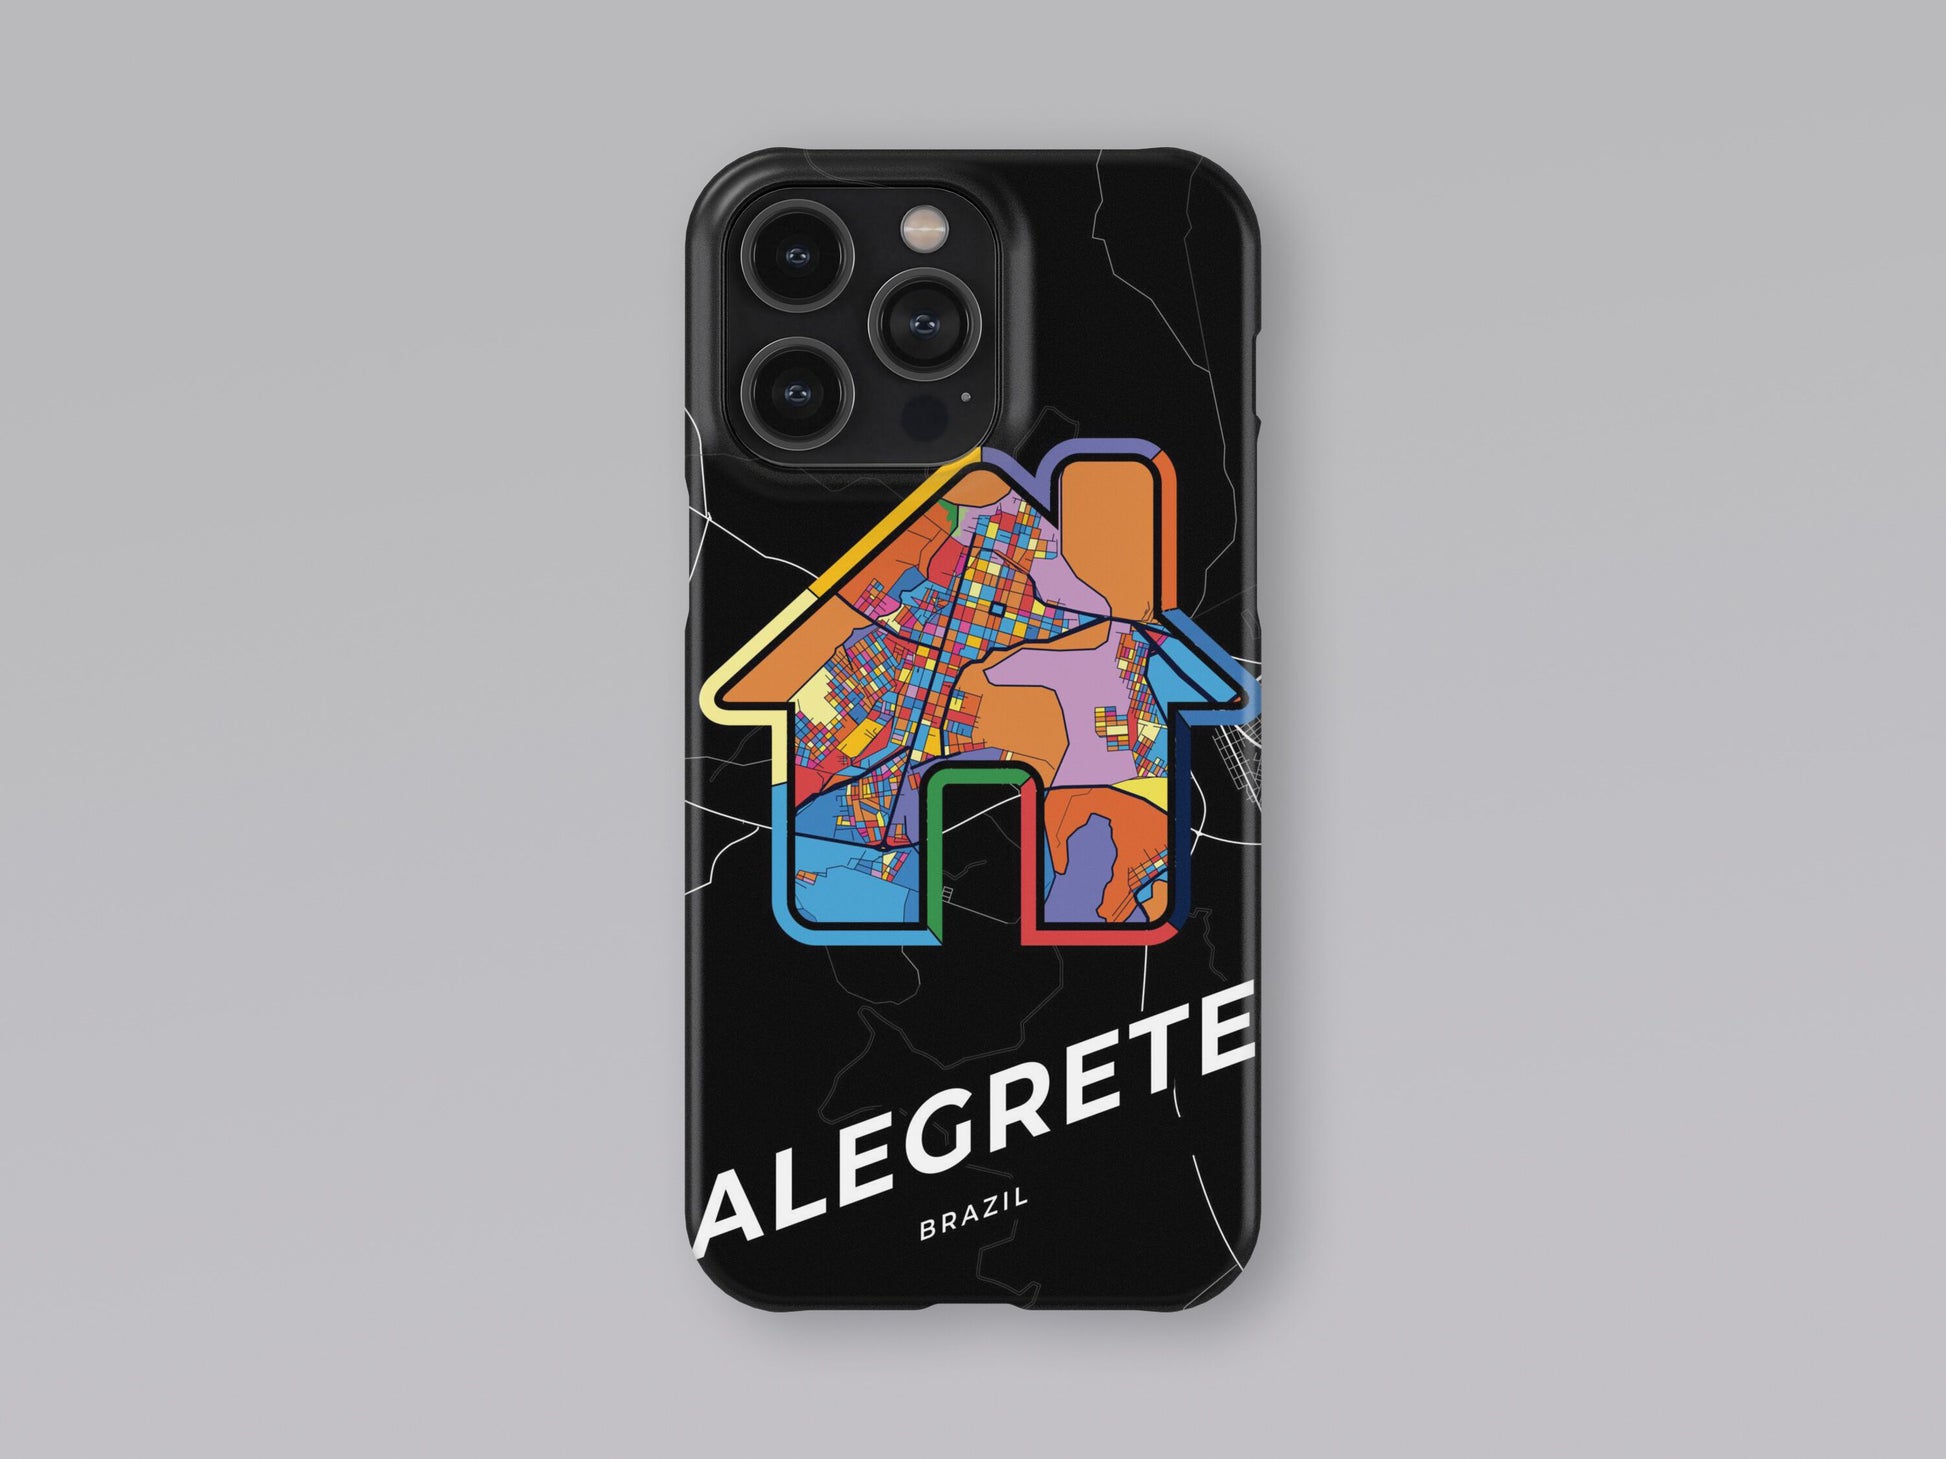 Alegrete Brazil slim phone case with colorful icon. Birthday, wedding or housewarming gift. Couple match cases. 3